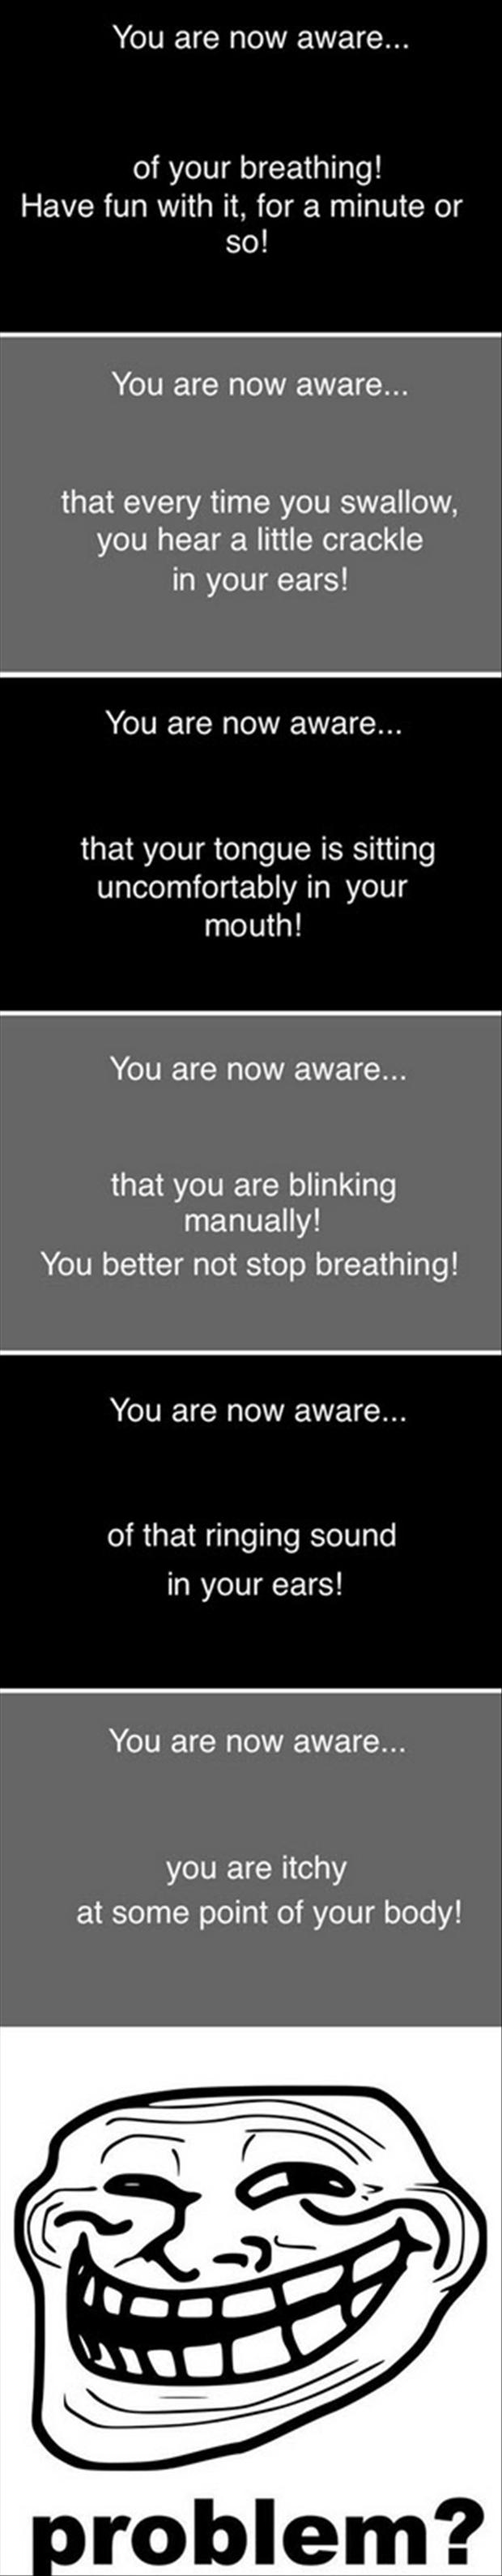 Aware now. Now you breathing manually. Aware of or about.